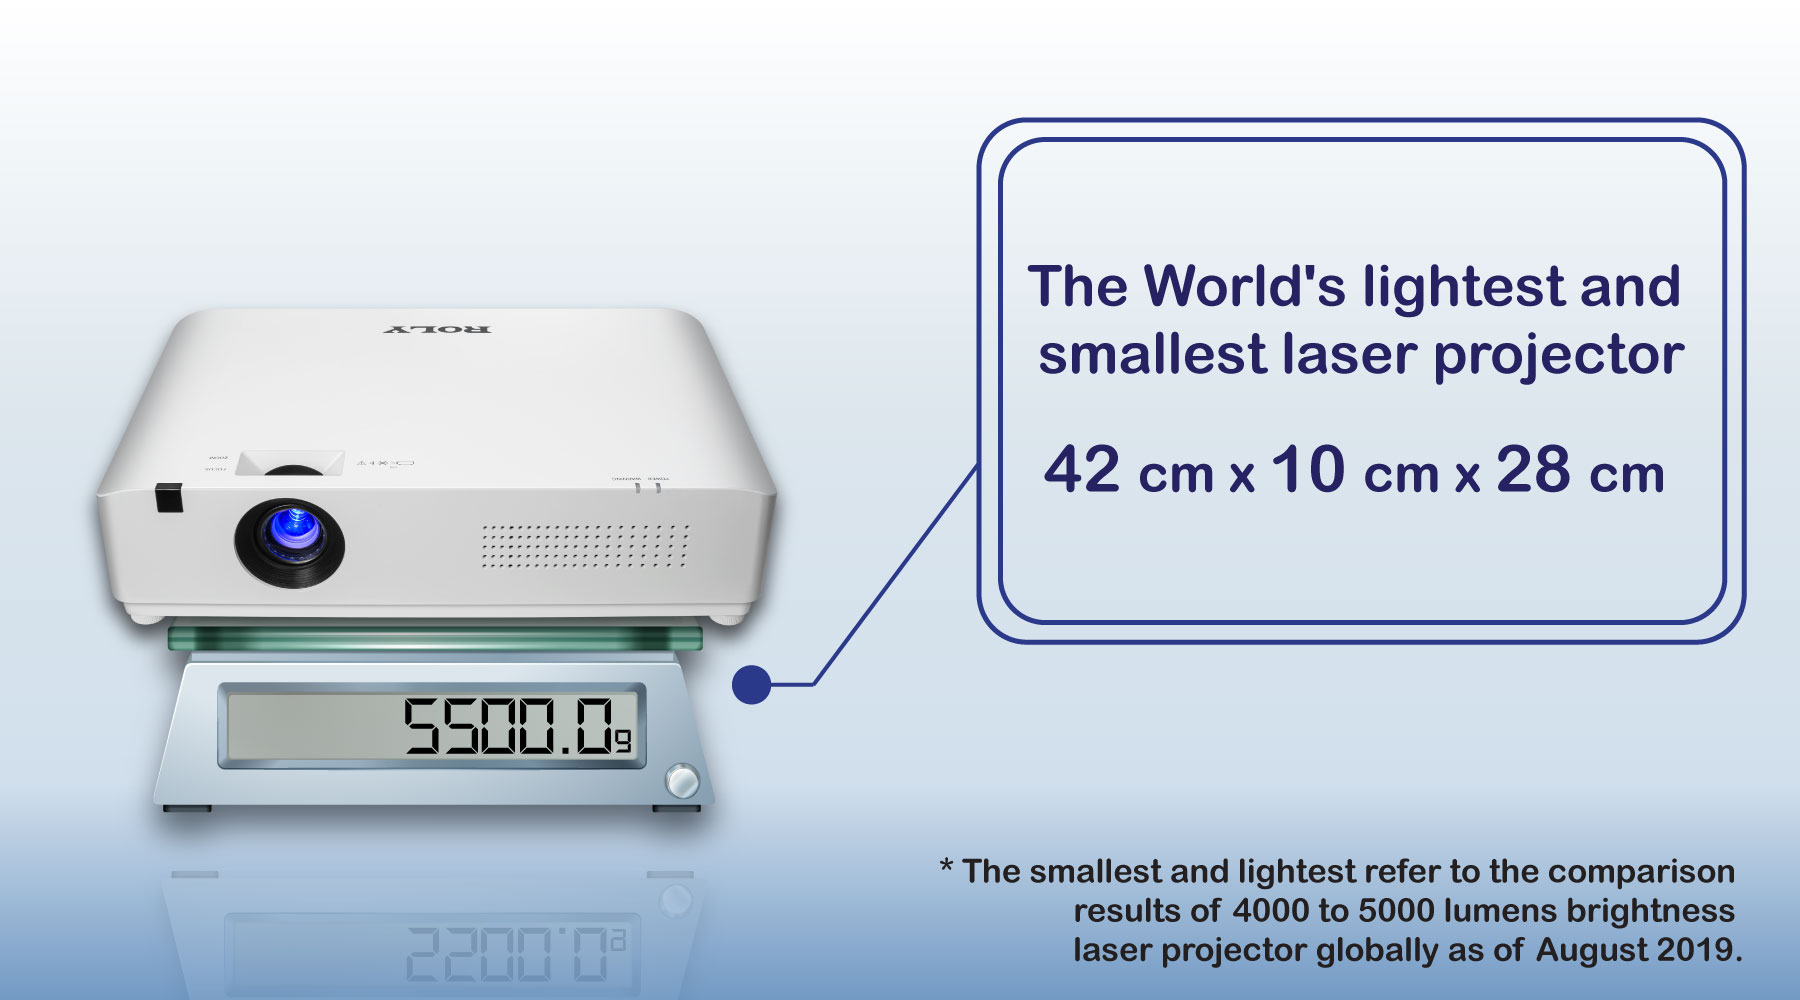 The World’s lightest and smallest laser projector